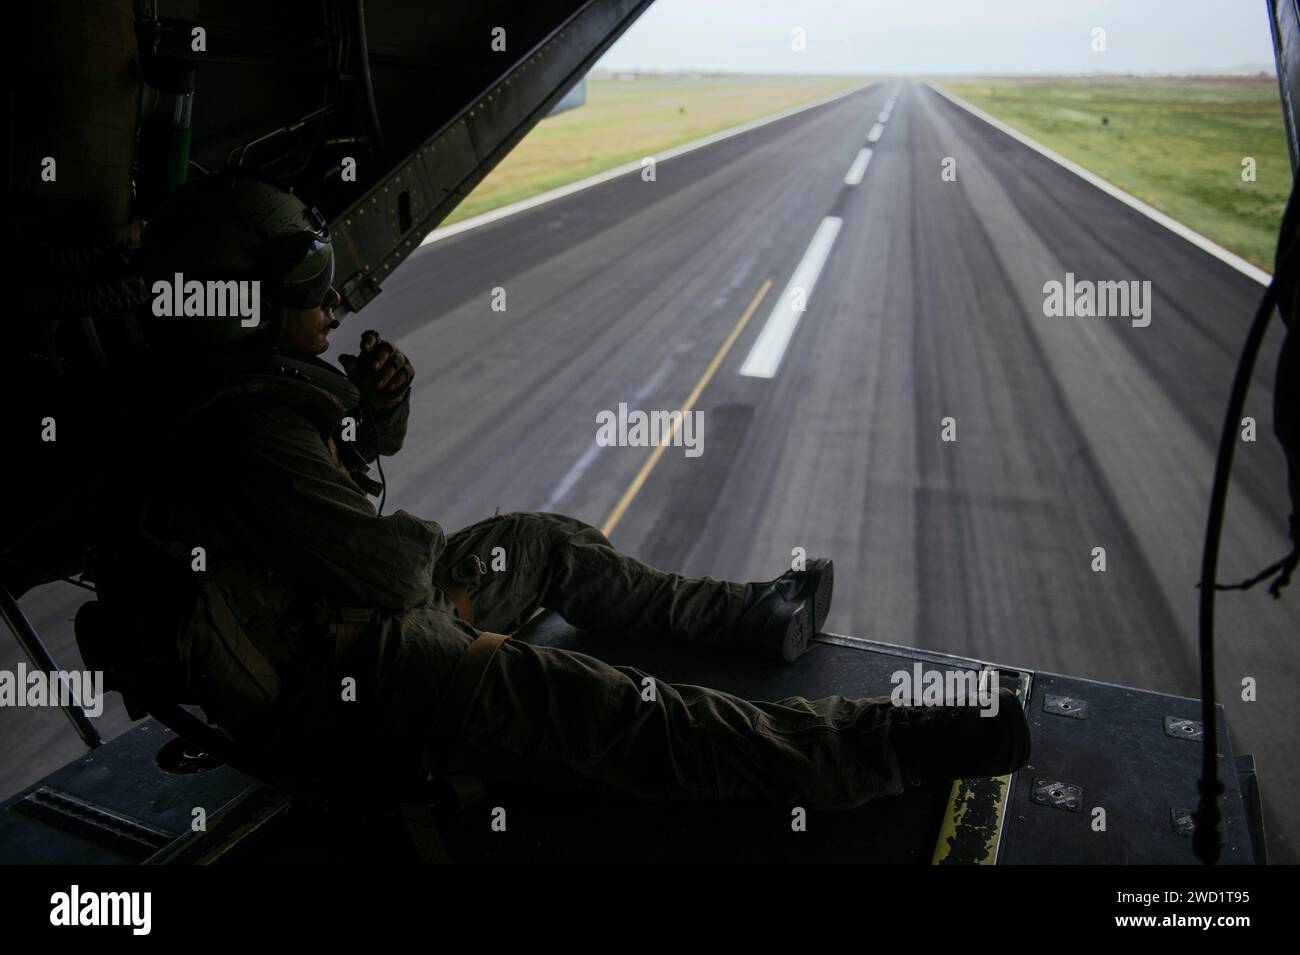 An MV-22 Osprey aircrewman relays information to pilots while transporting personnel. Stock Photo